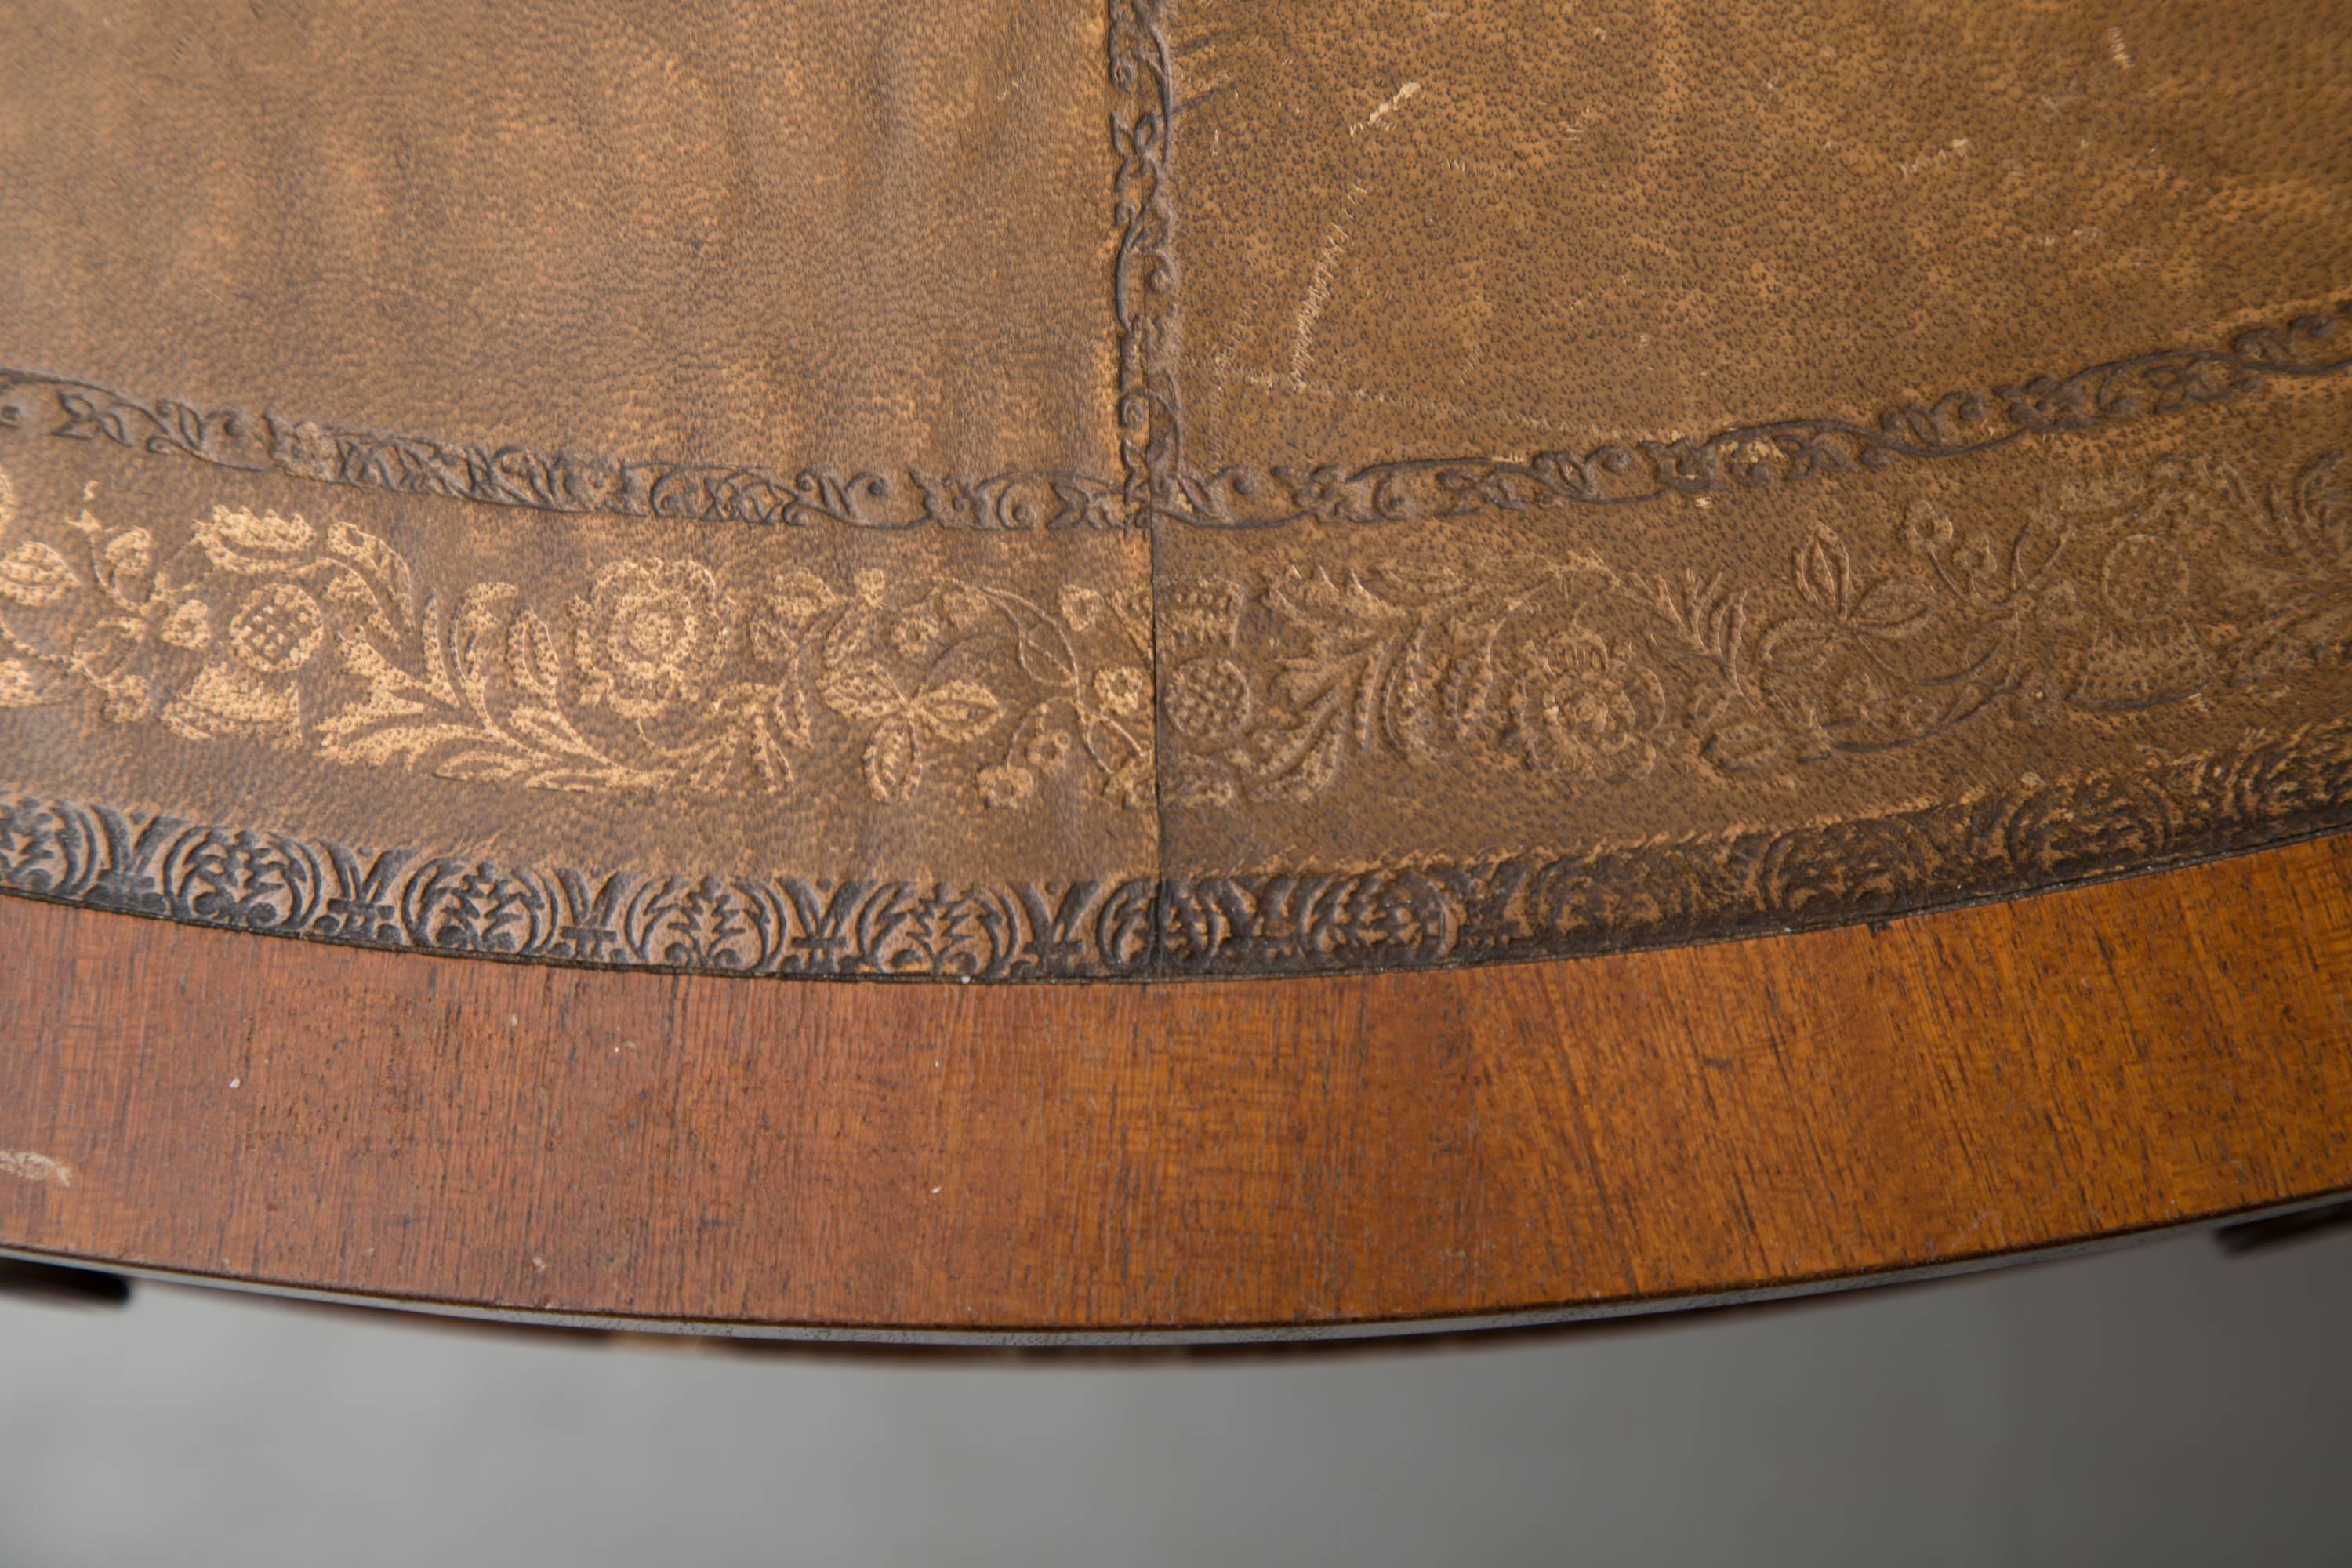 Embossed English Mahogany Drum Table with Leather Inset